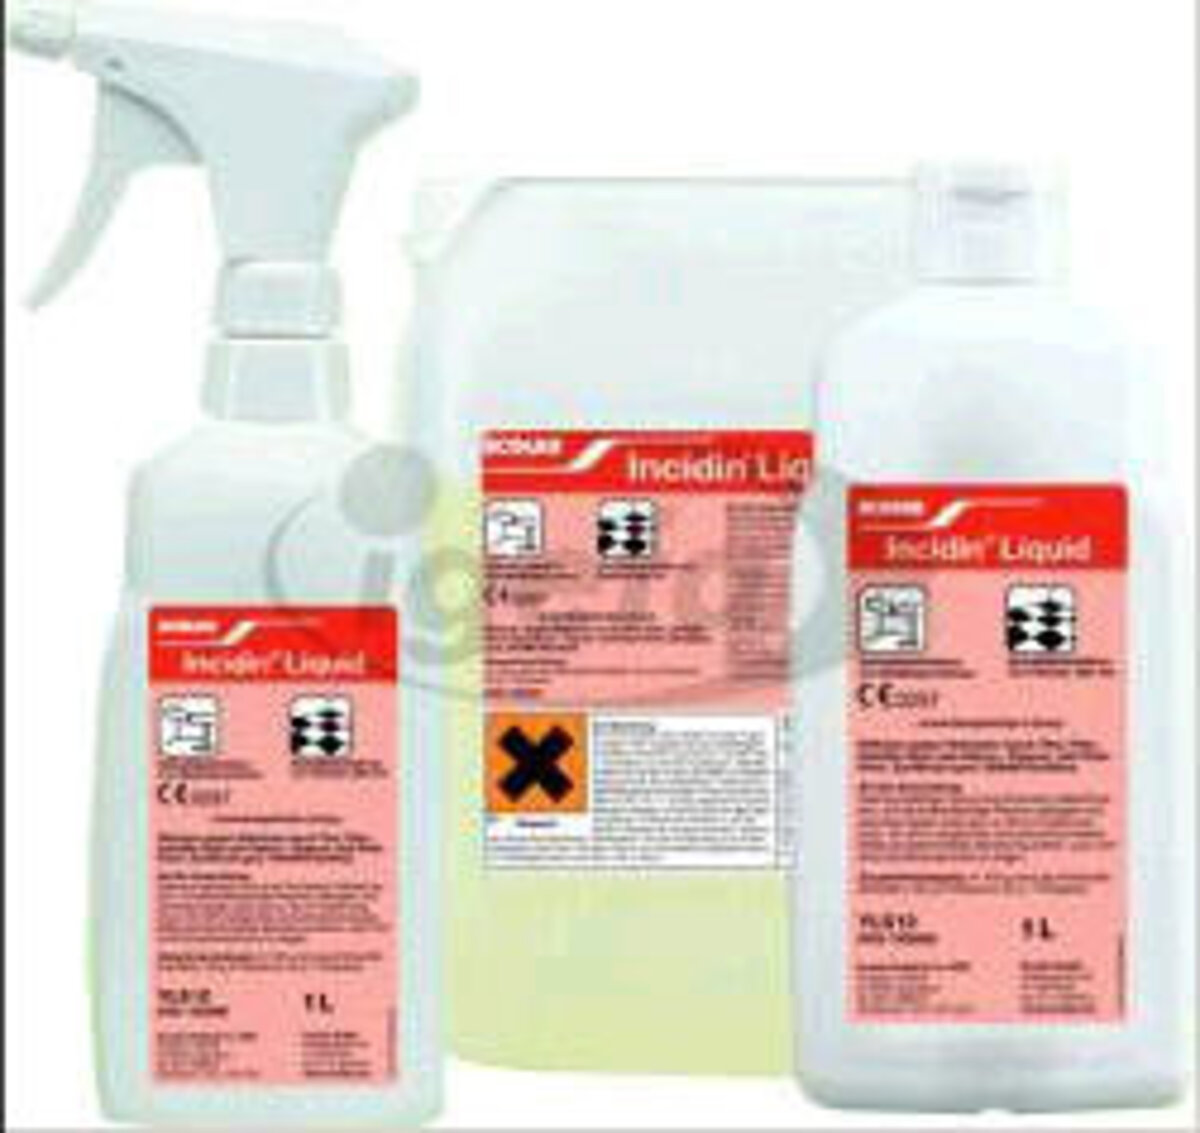 Cleanroom disinfection spray, especially for cleanroom curtains